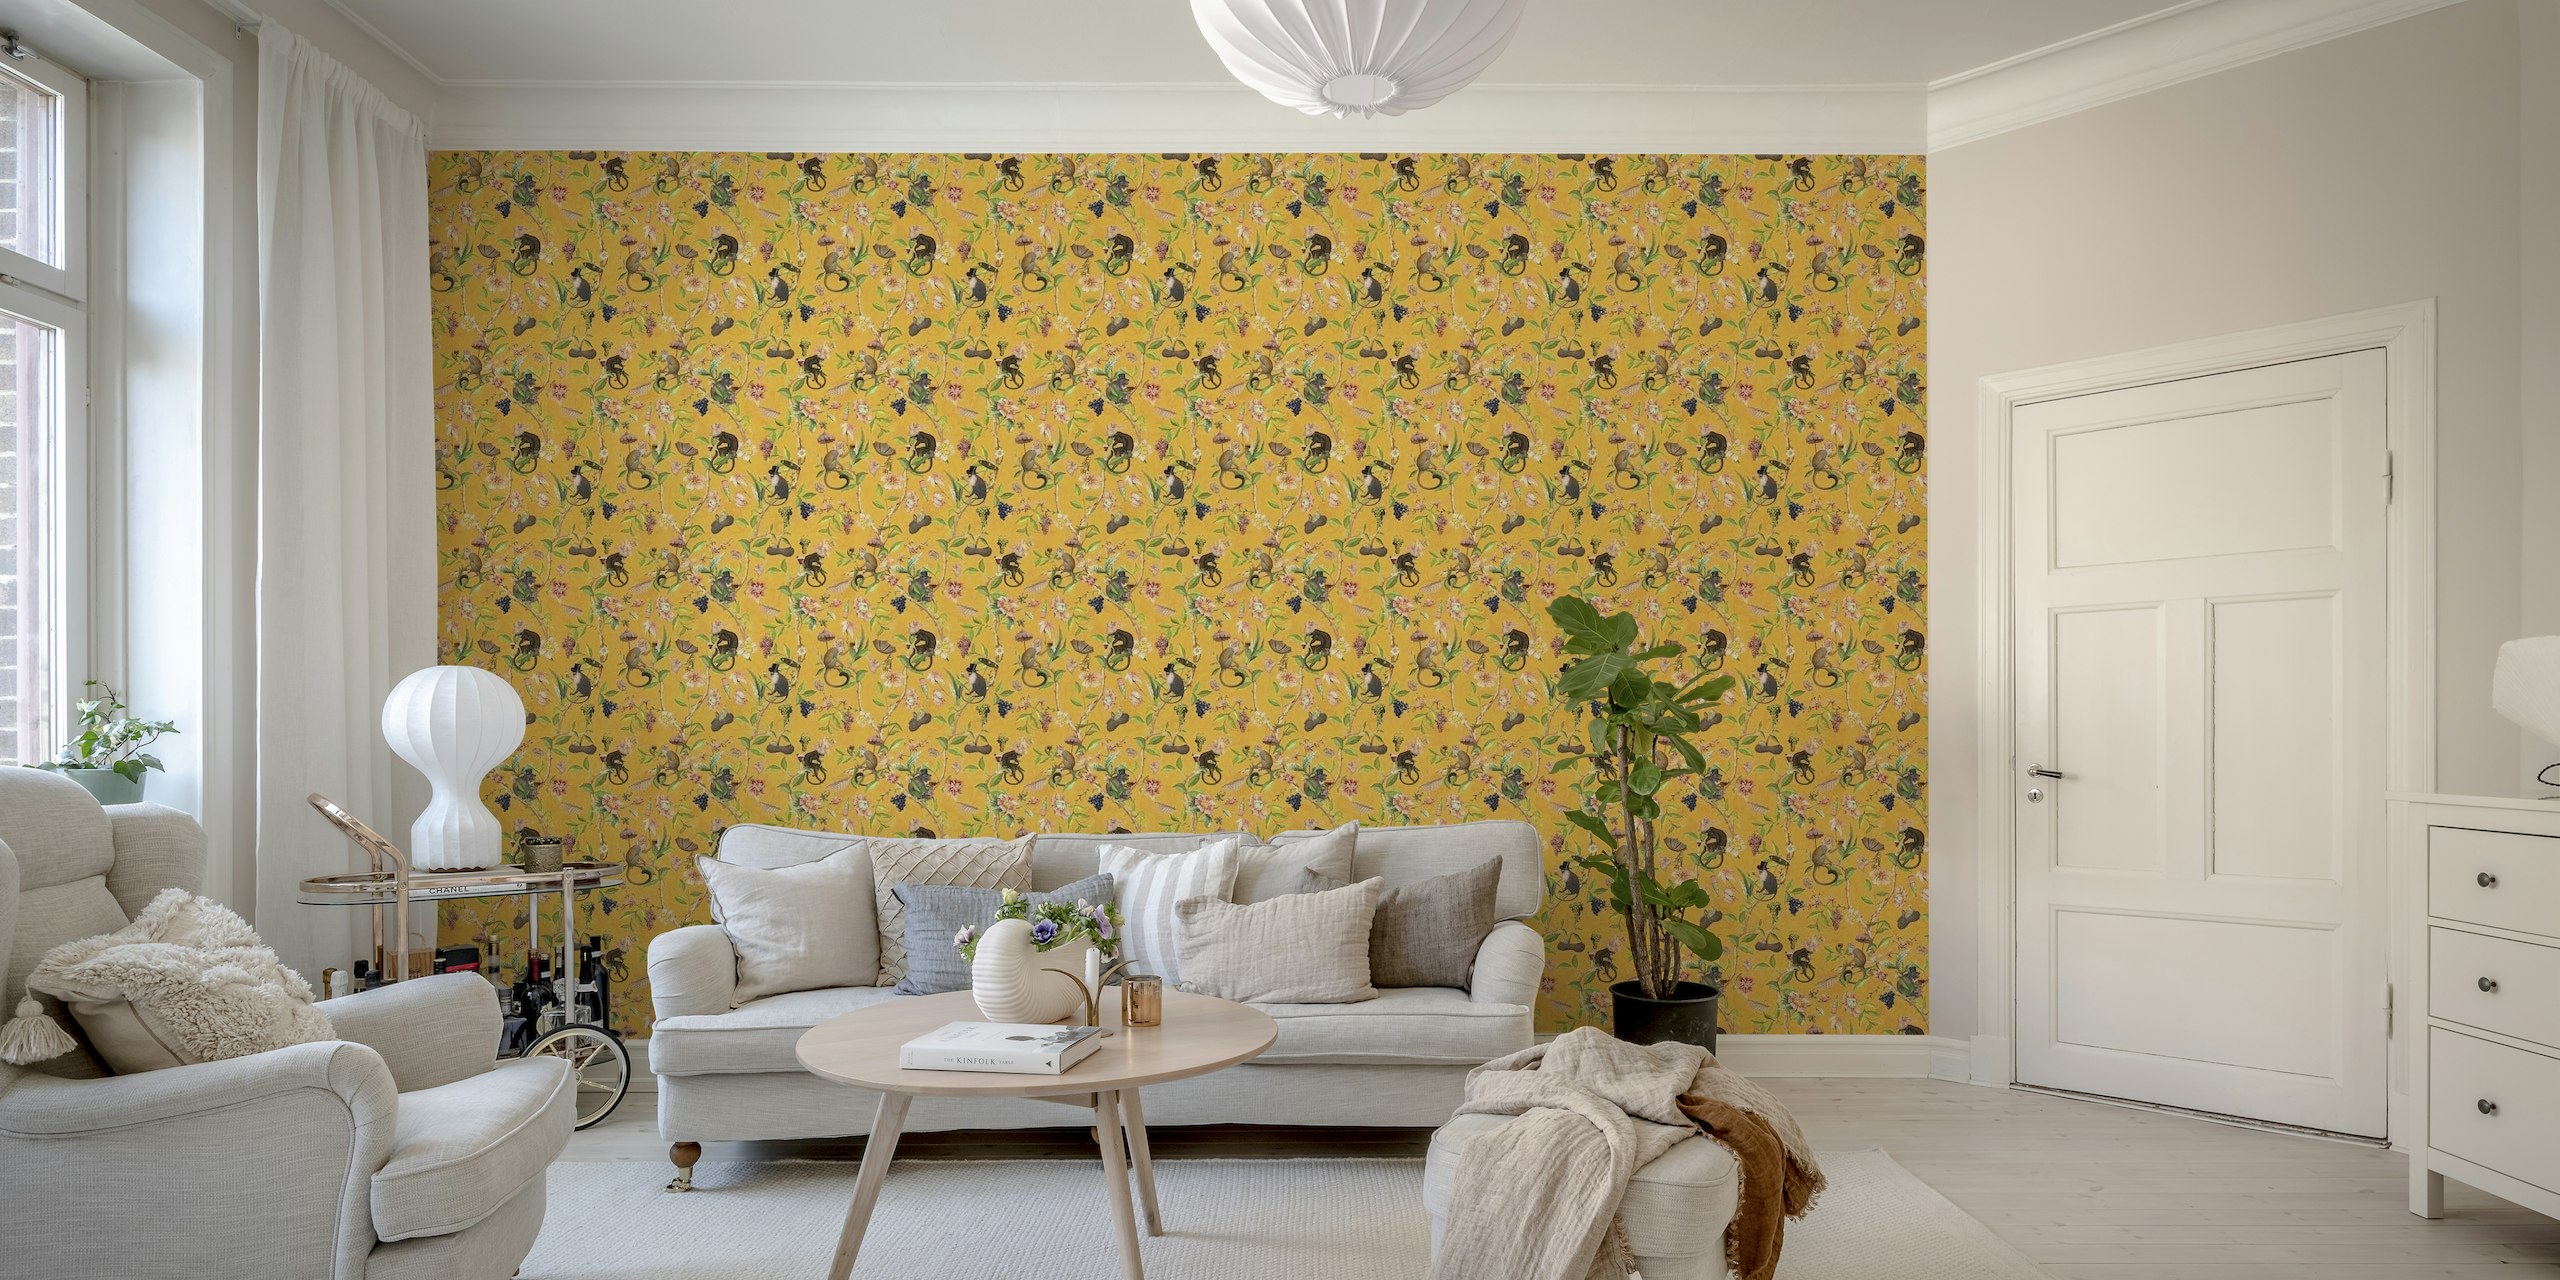 Vibrant golden wall mural featuring playful monkeys and chinoiserie-inspired foliage